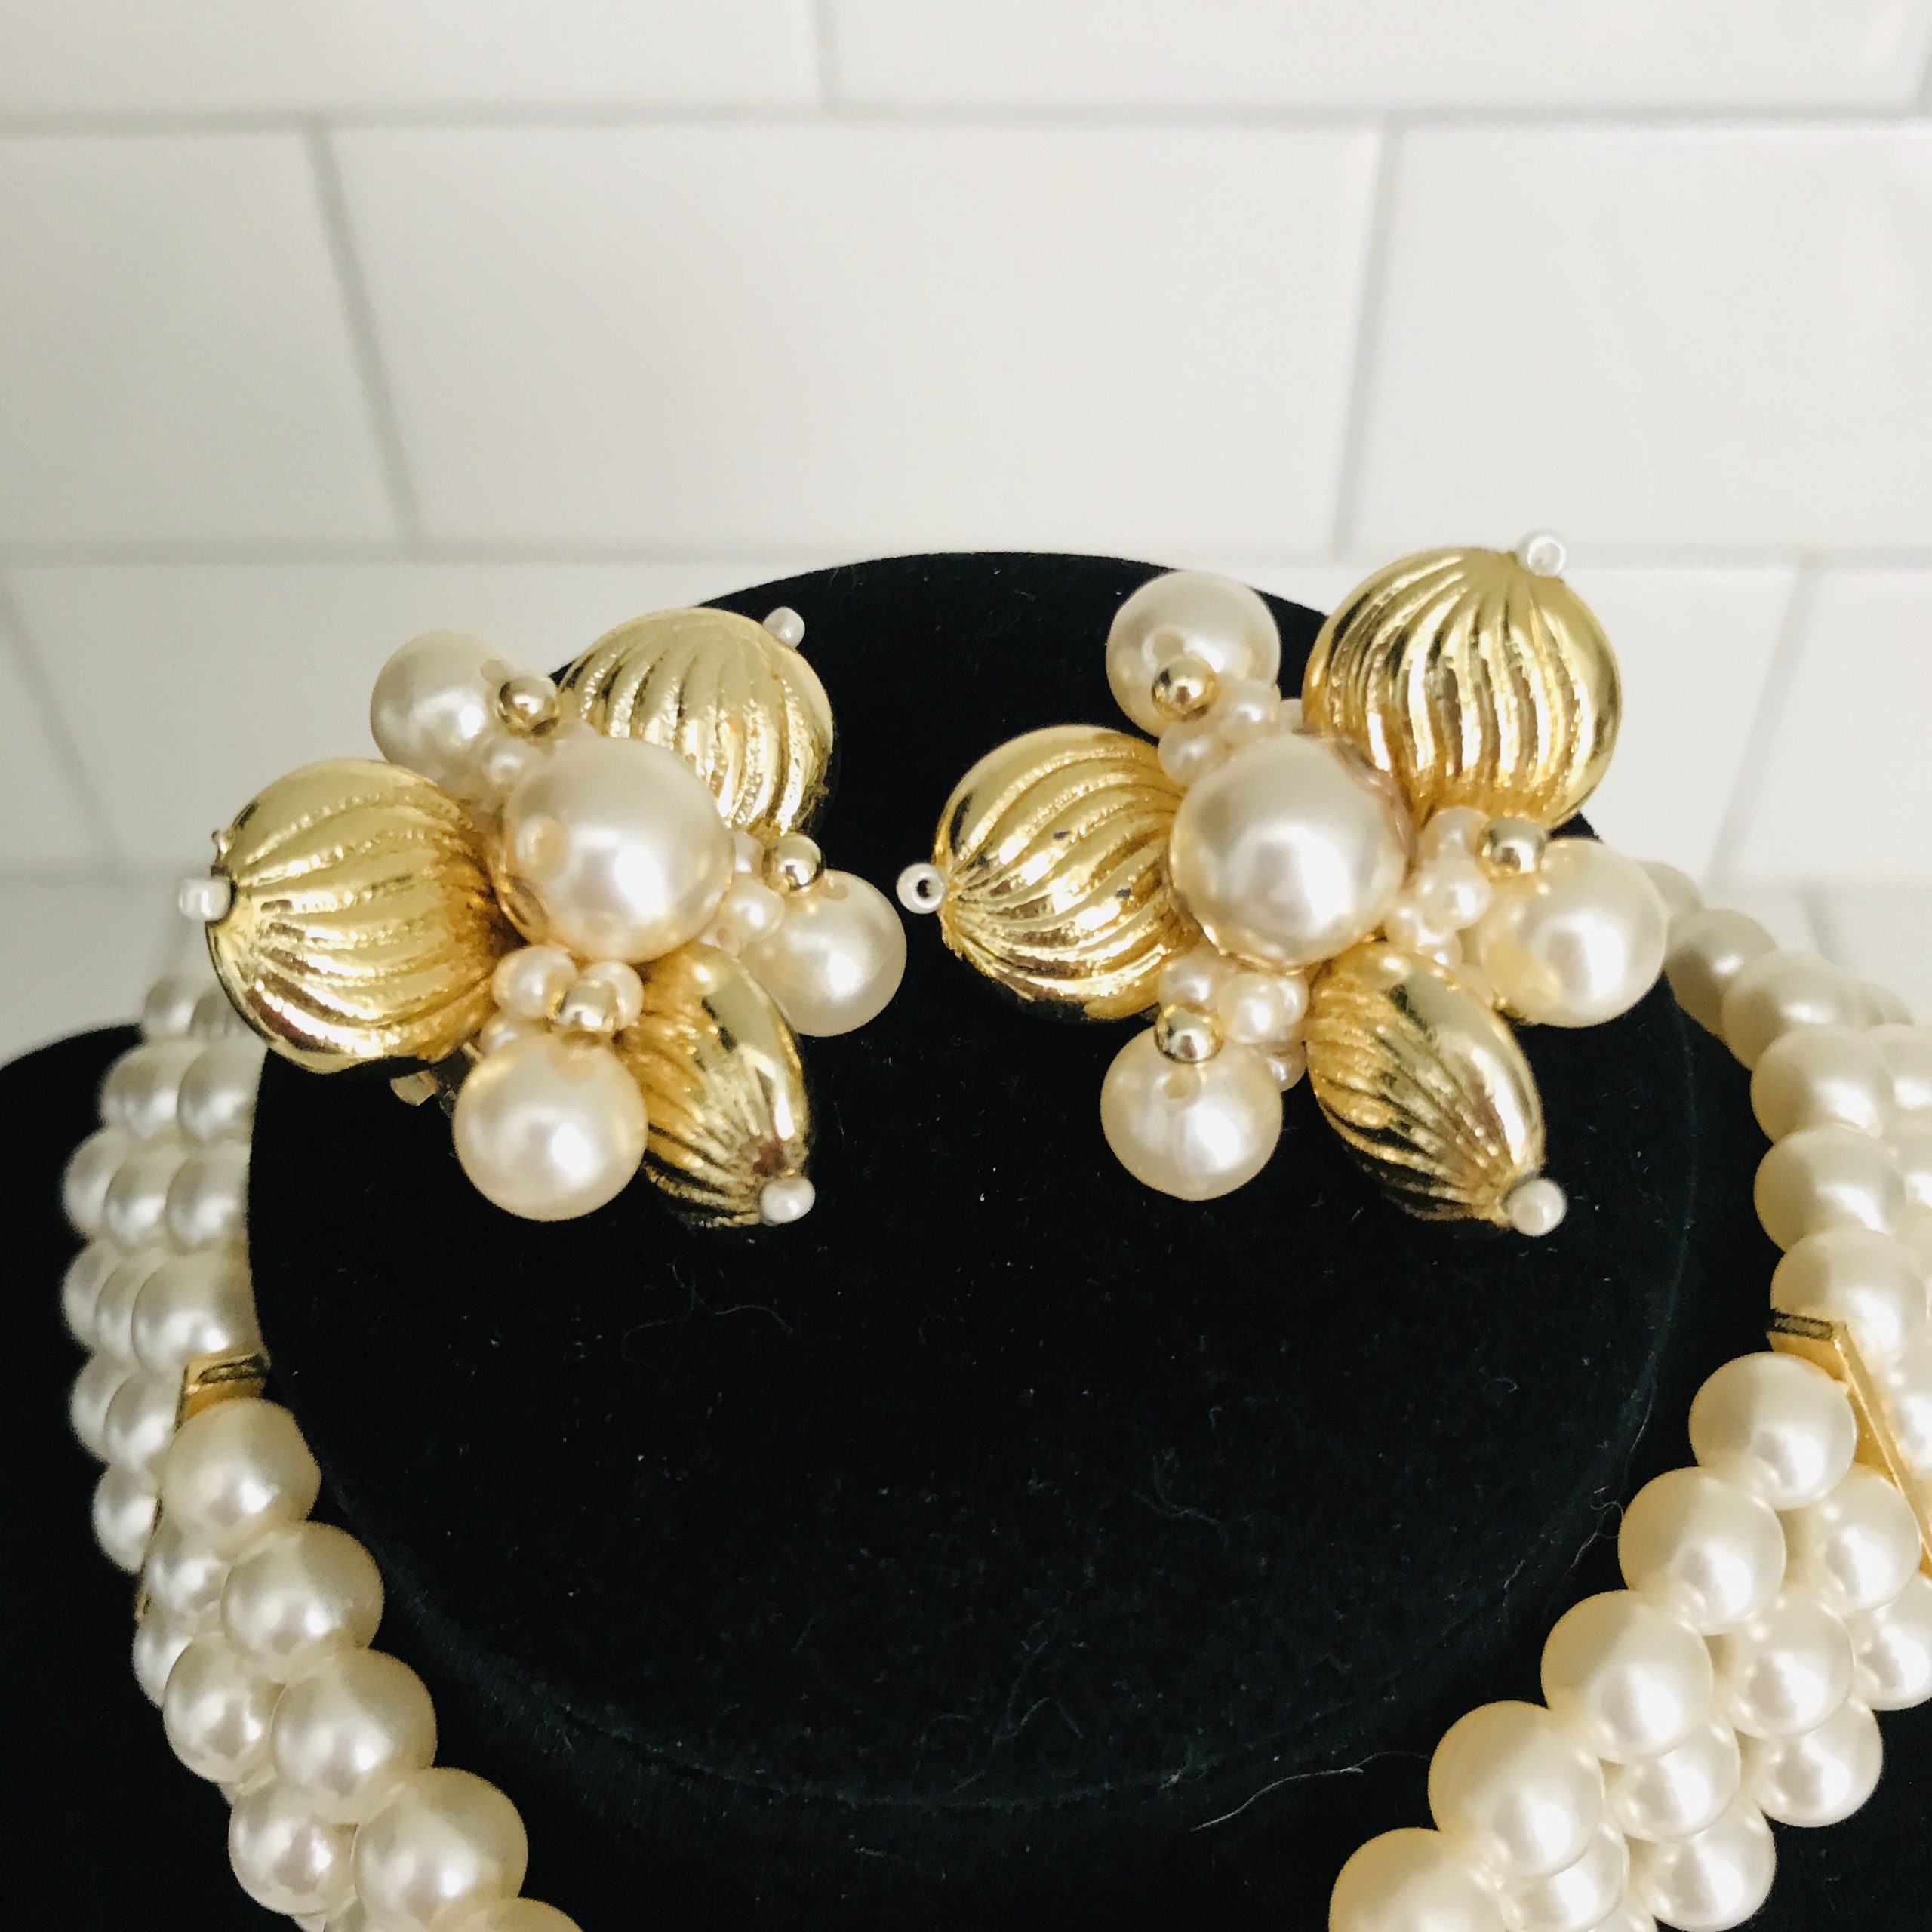 Vintage Faux Pearls Necklace and Earrings (item #1428423)